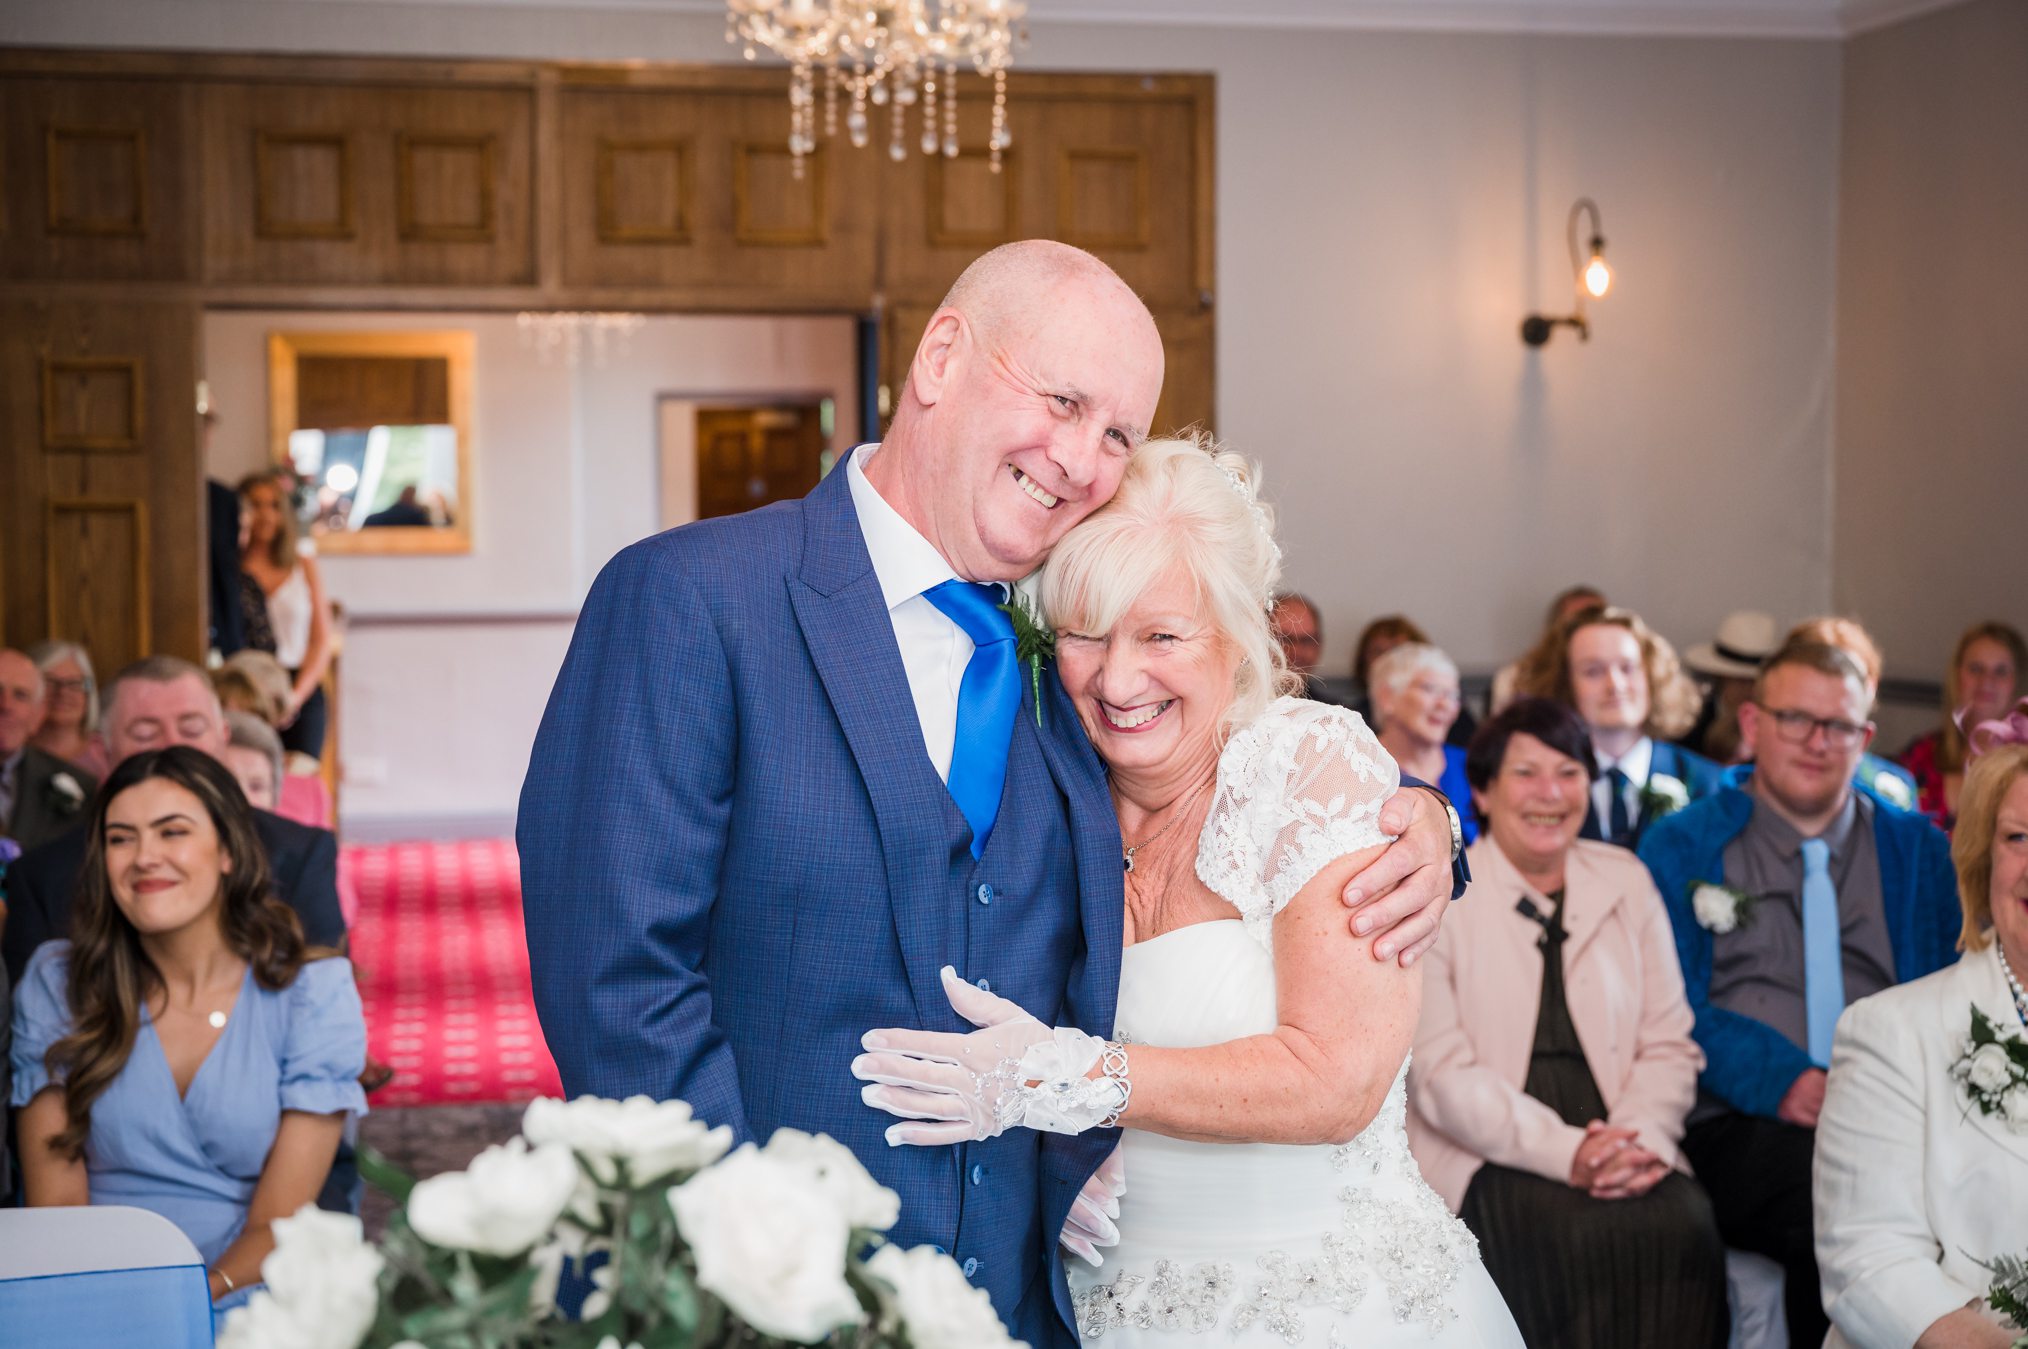 picture form the wedding service, Bride and Groom portraits - Holmfield Arms